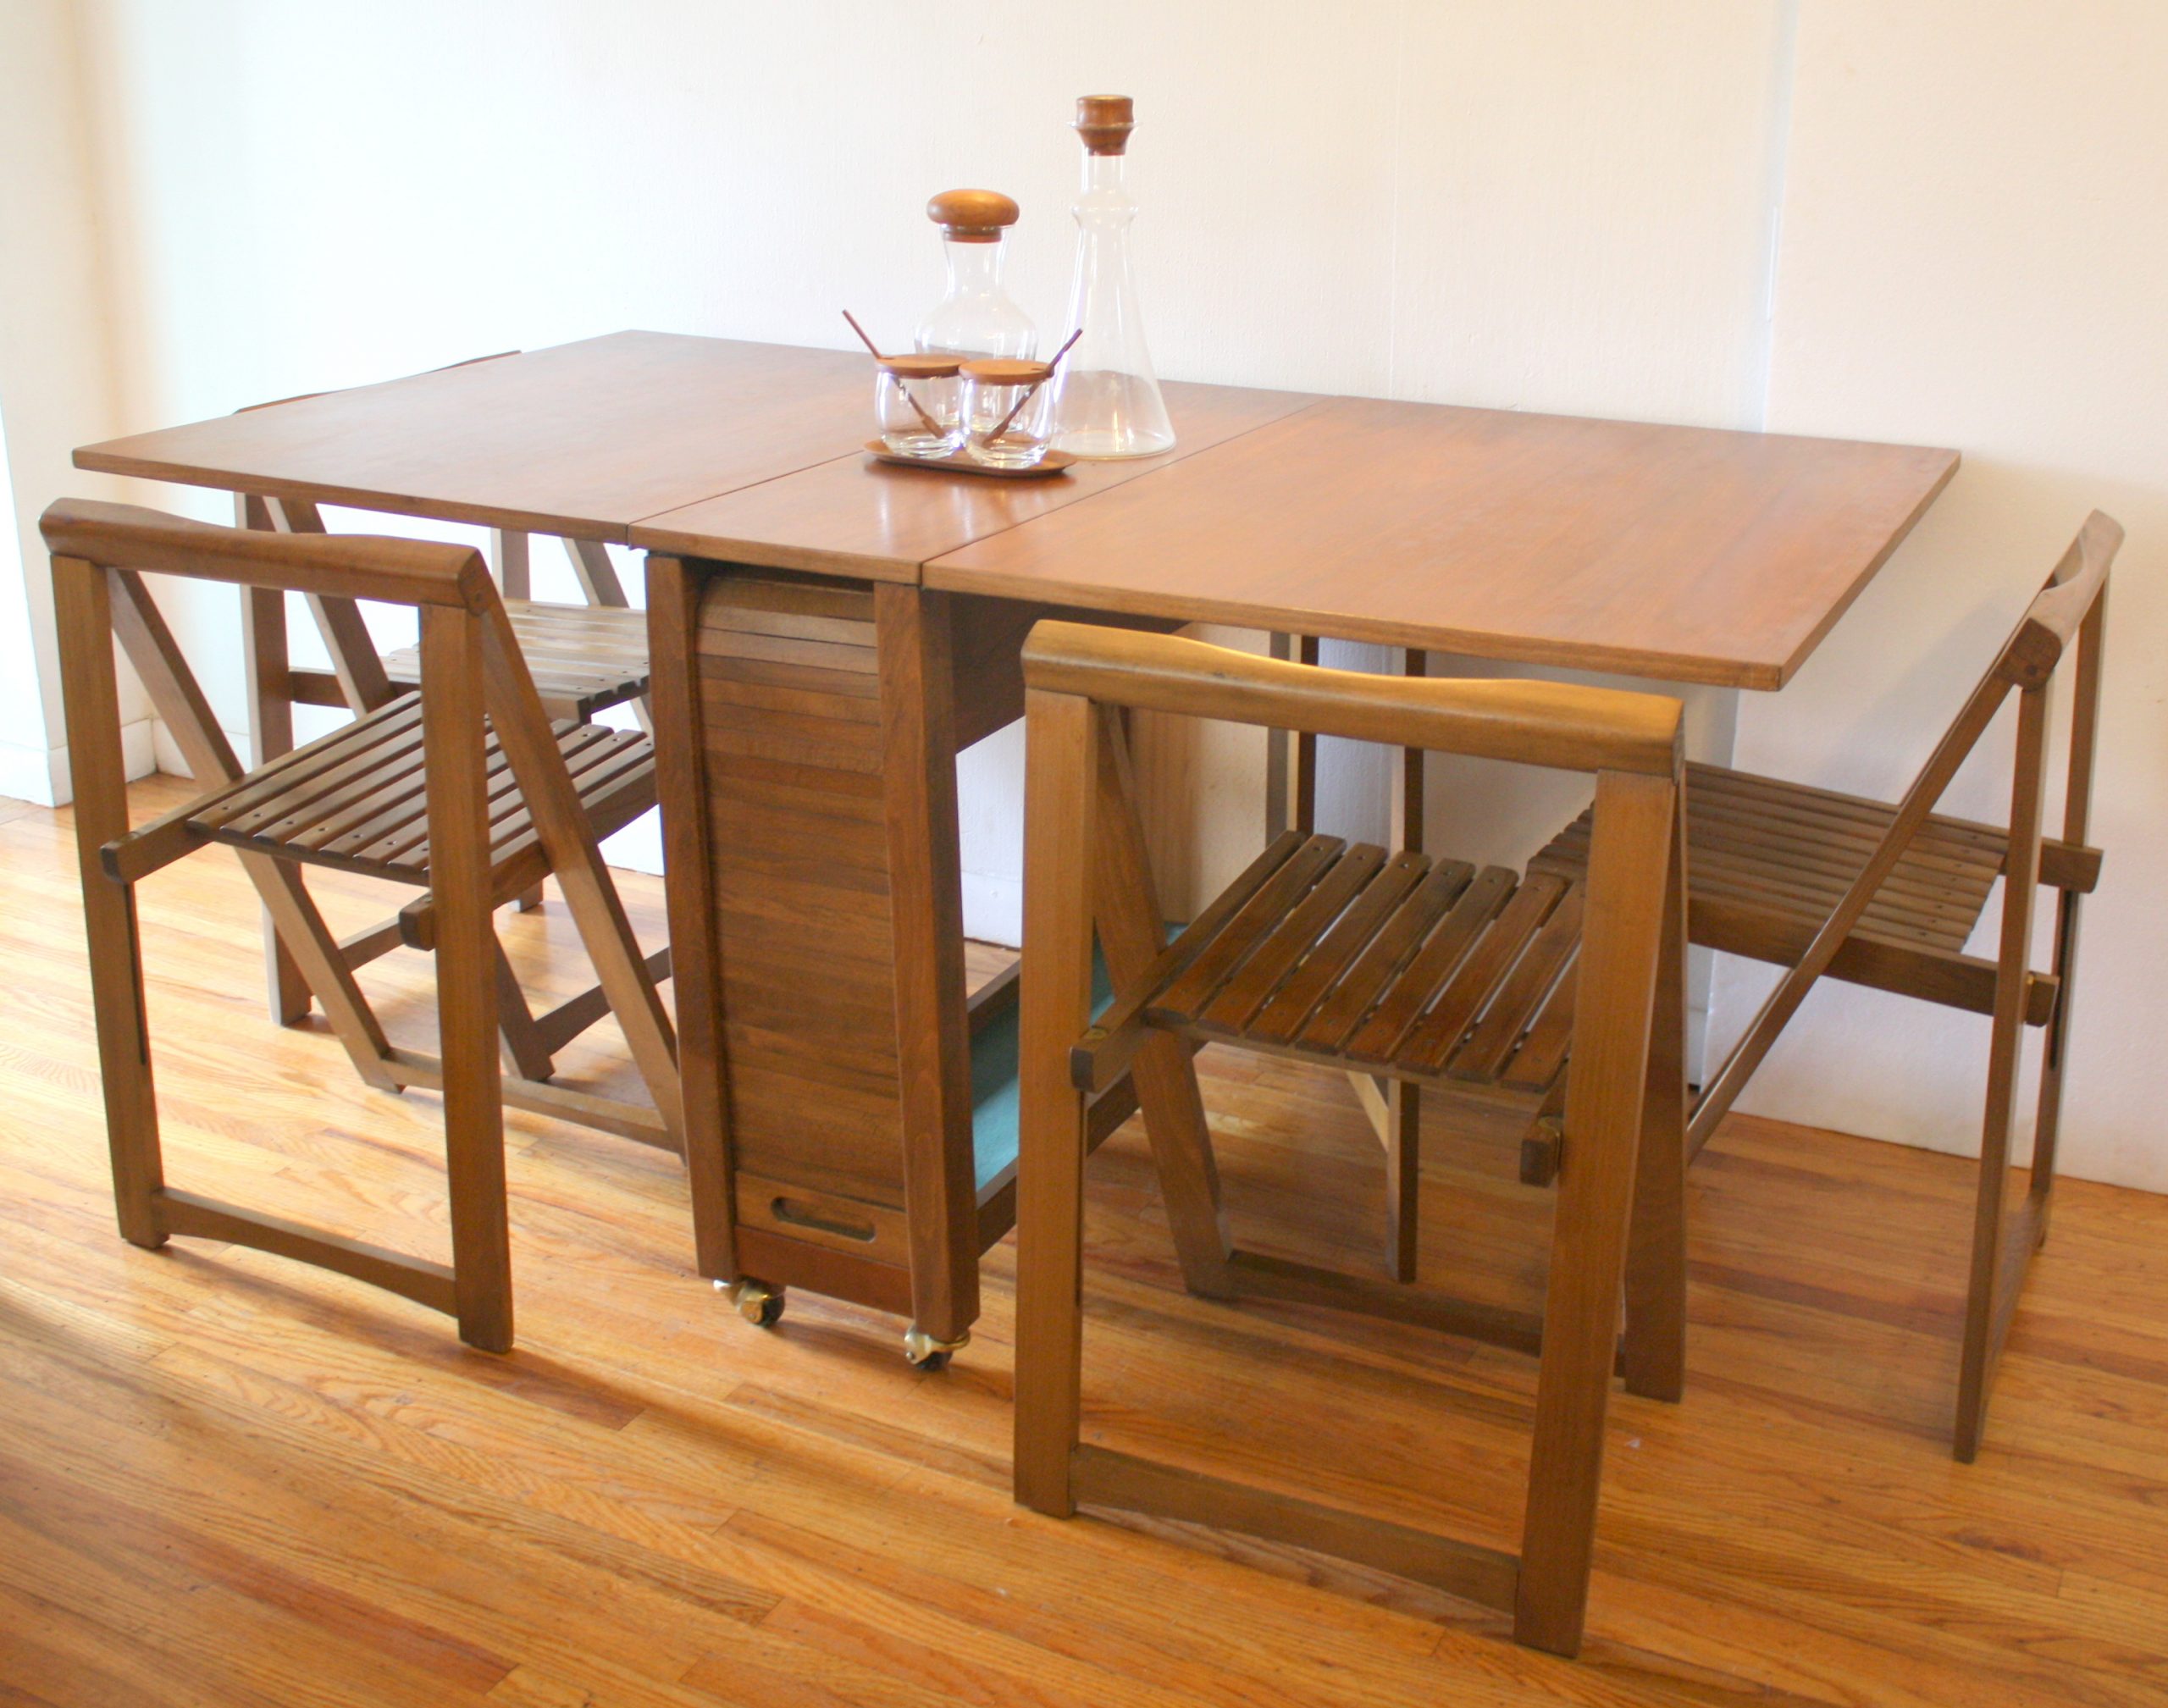 Mid Century Modern Gateleg Table With Folding Chairs Within Sizing 3040 X 2395 Scaled 